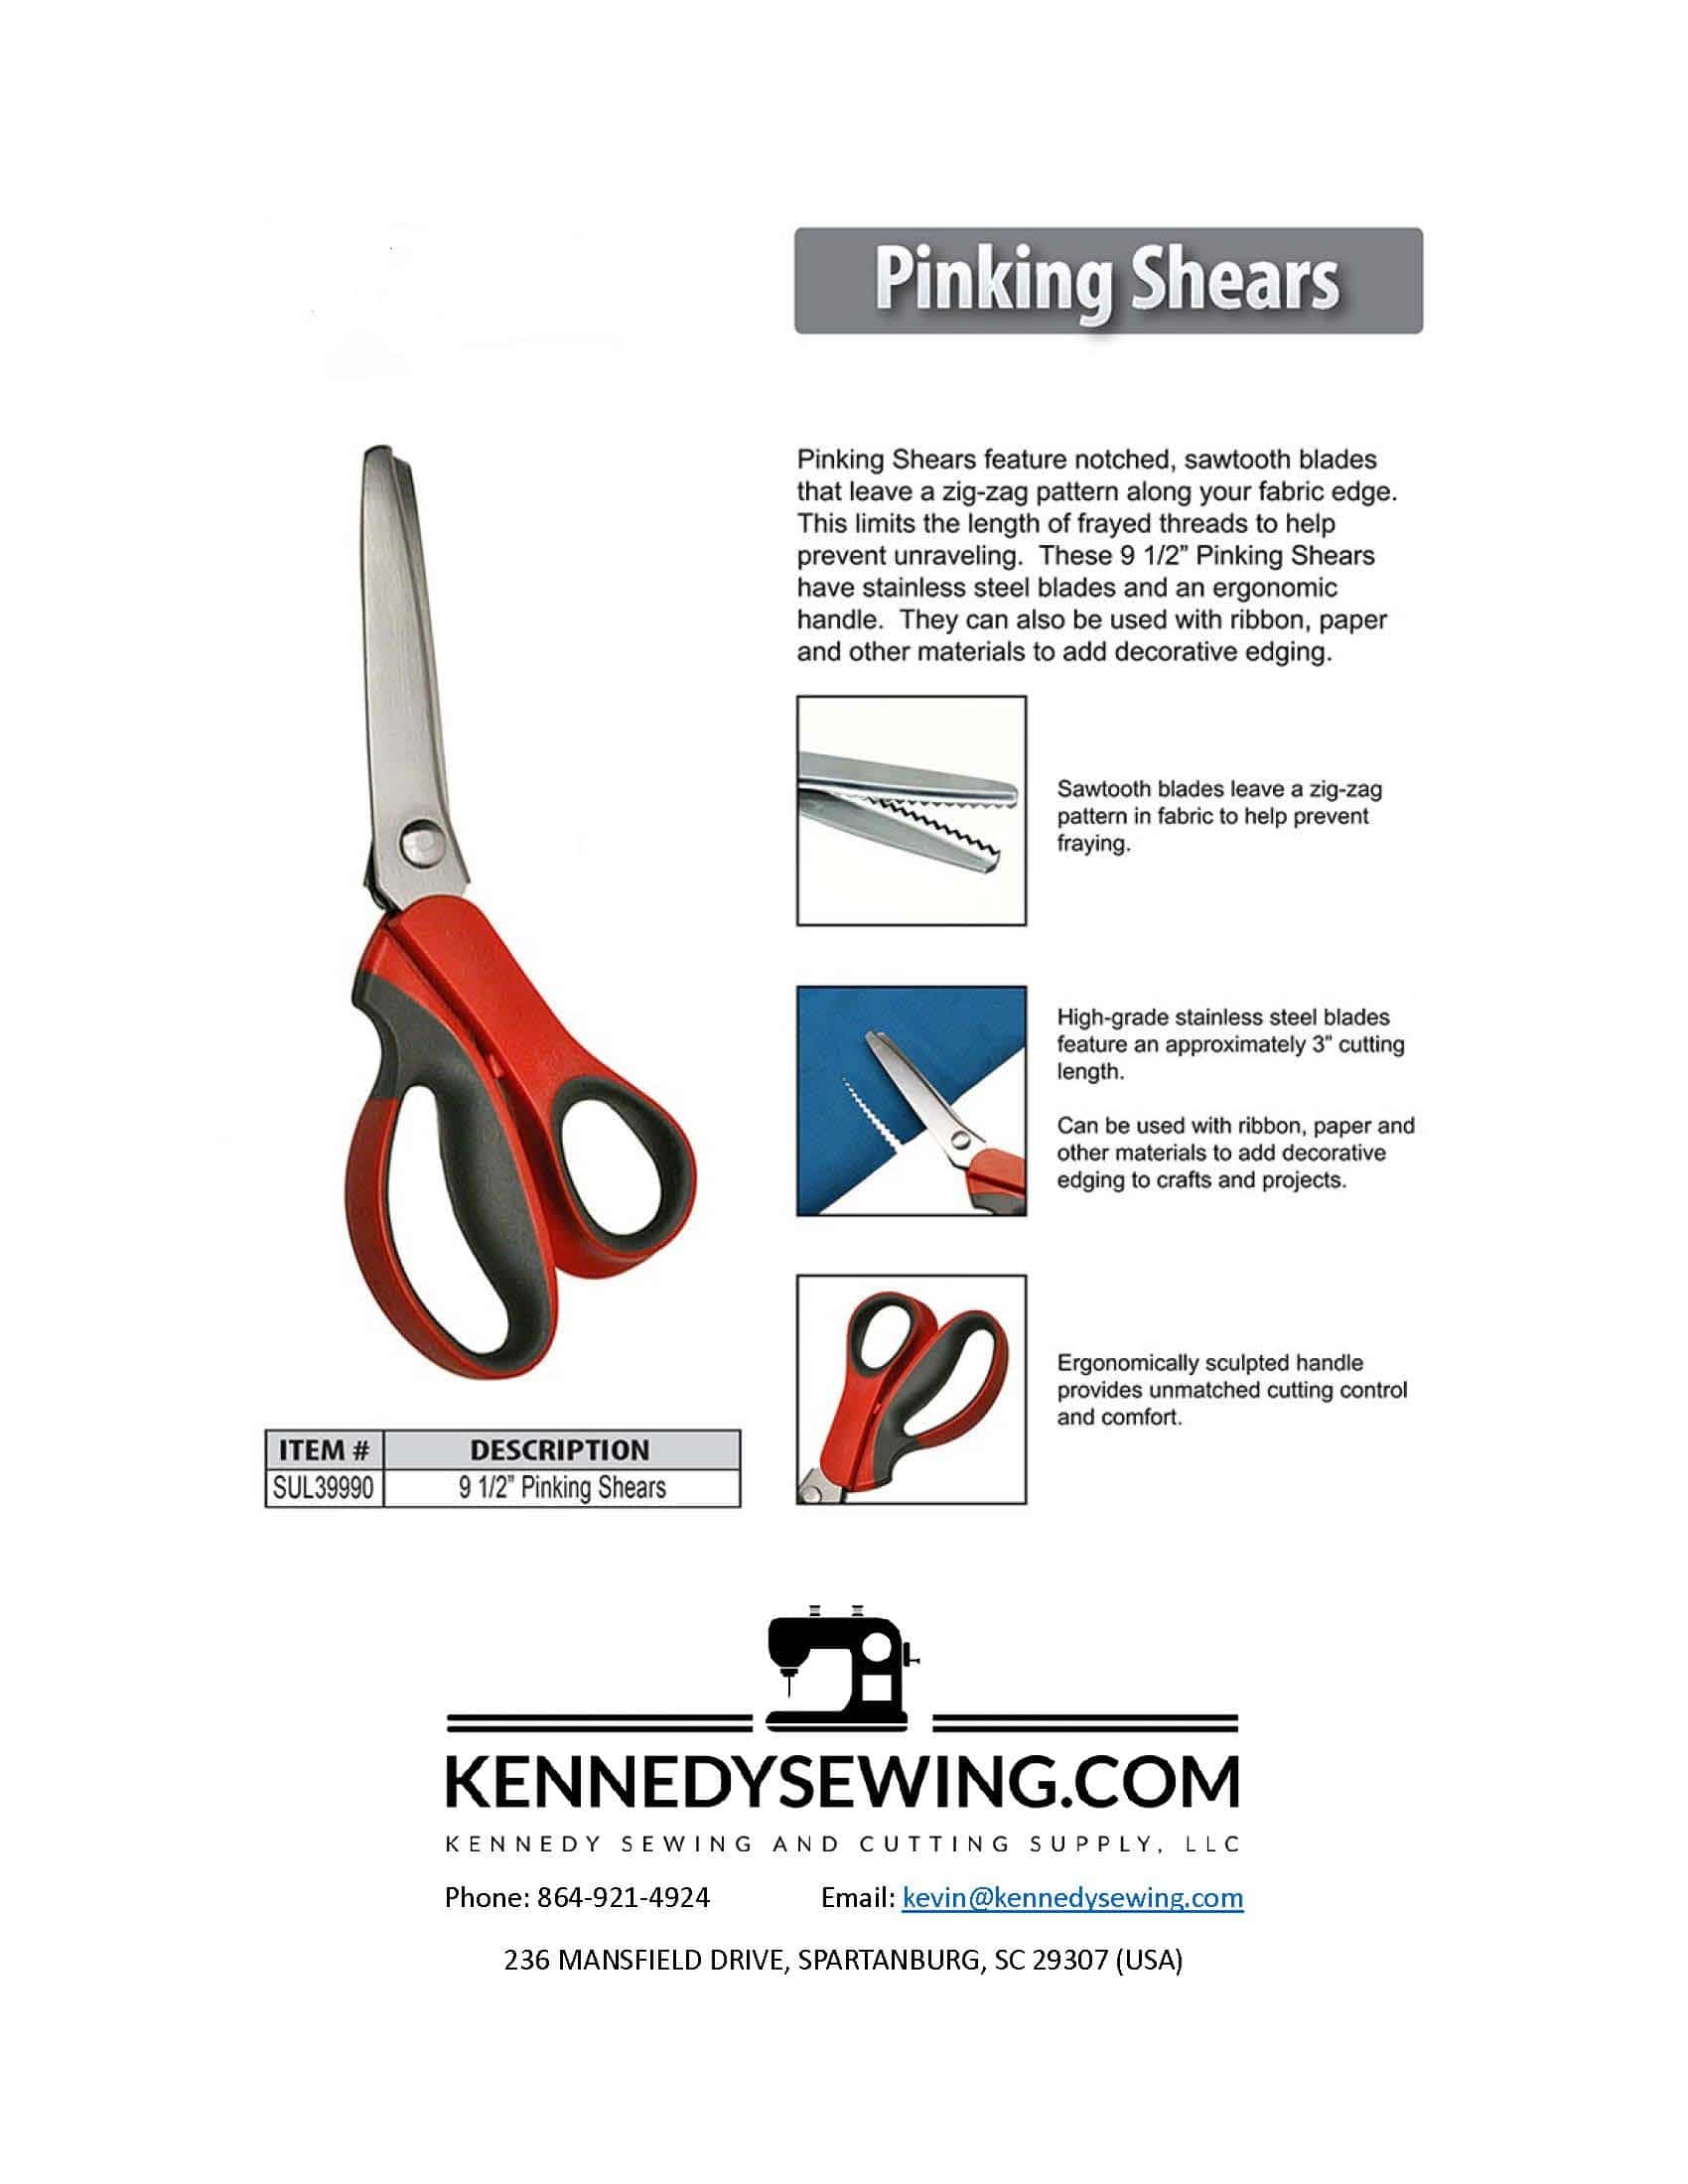 SULIVANS PINKING SHEARS SUL39990 - 9-1/2" SHEARS